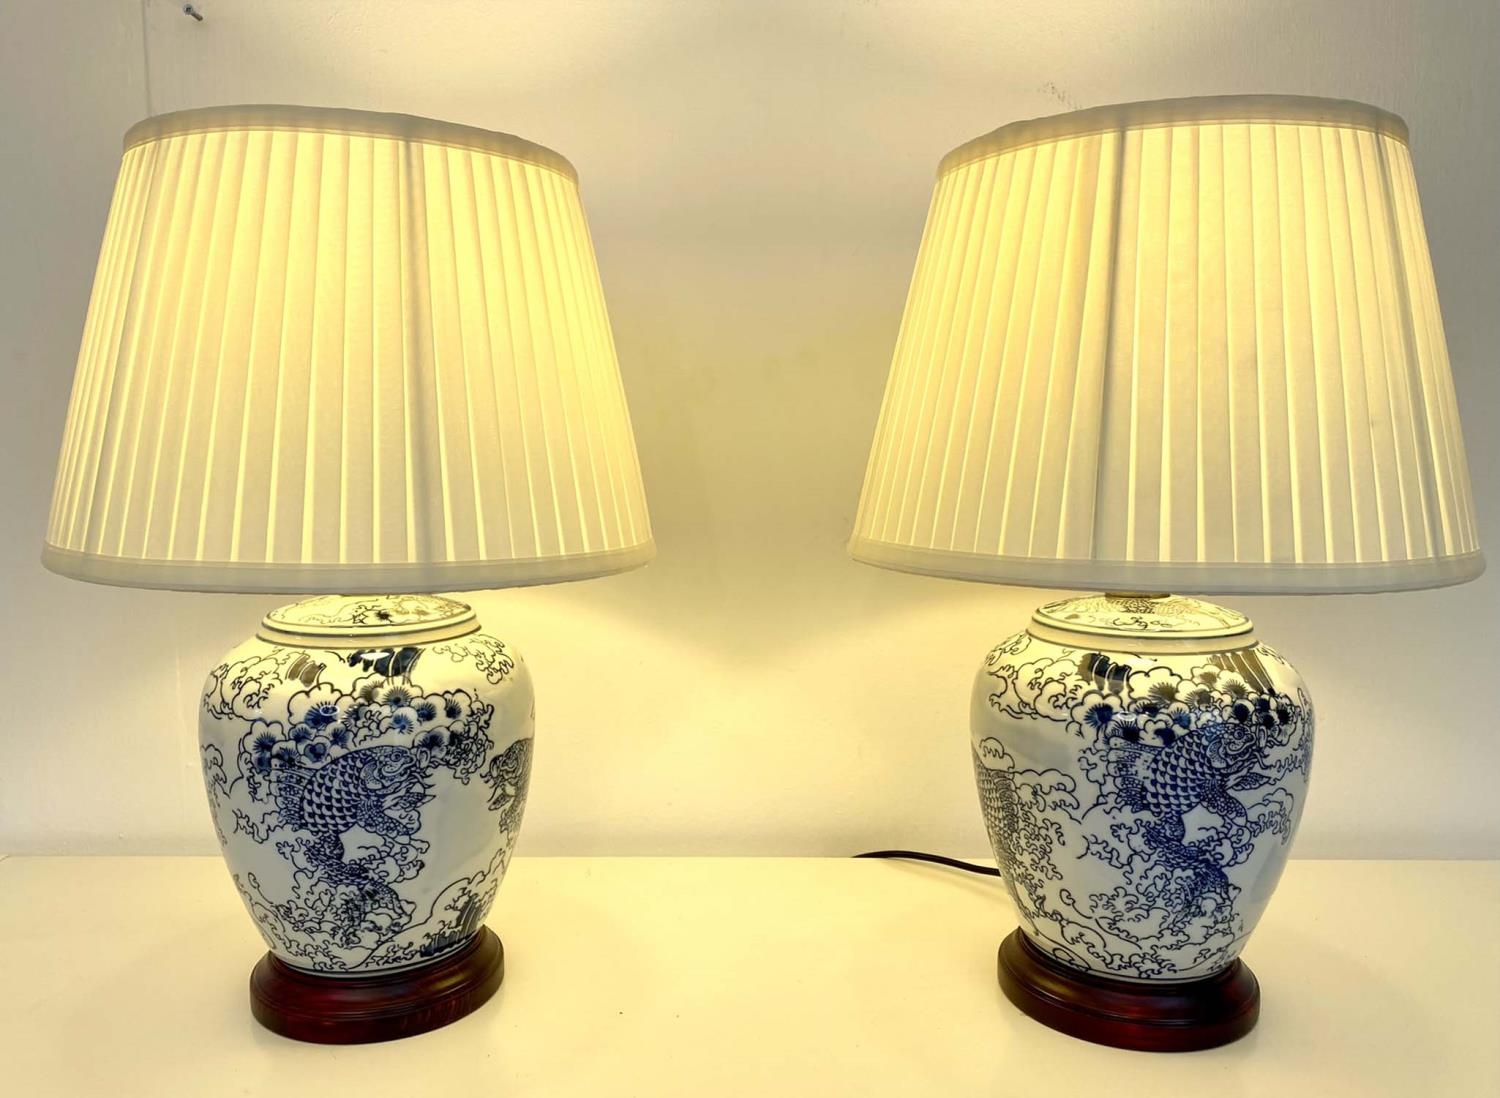 TABLE LAMPS, pair, 52cm H x 35cm diam., Chinese export style blue and white ceramic, Carp detail, - Image 3 of 3